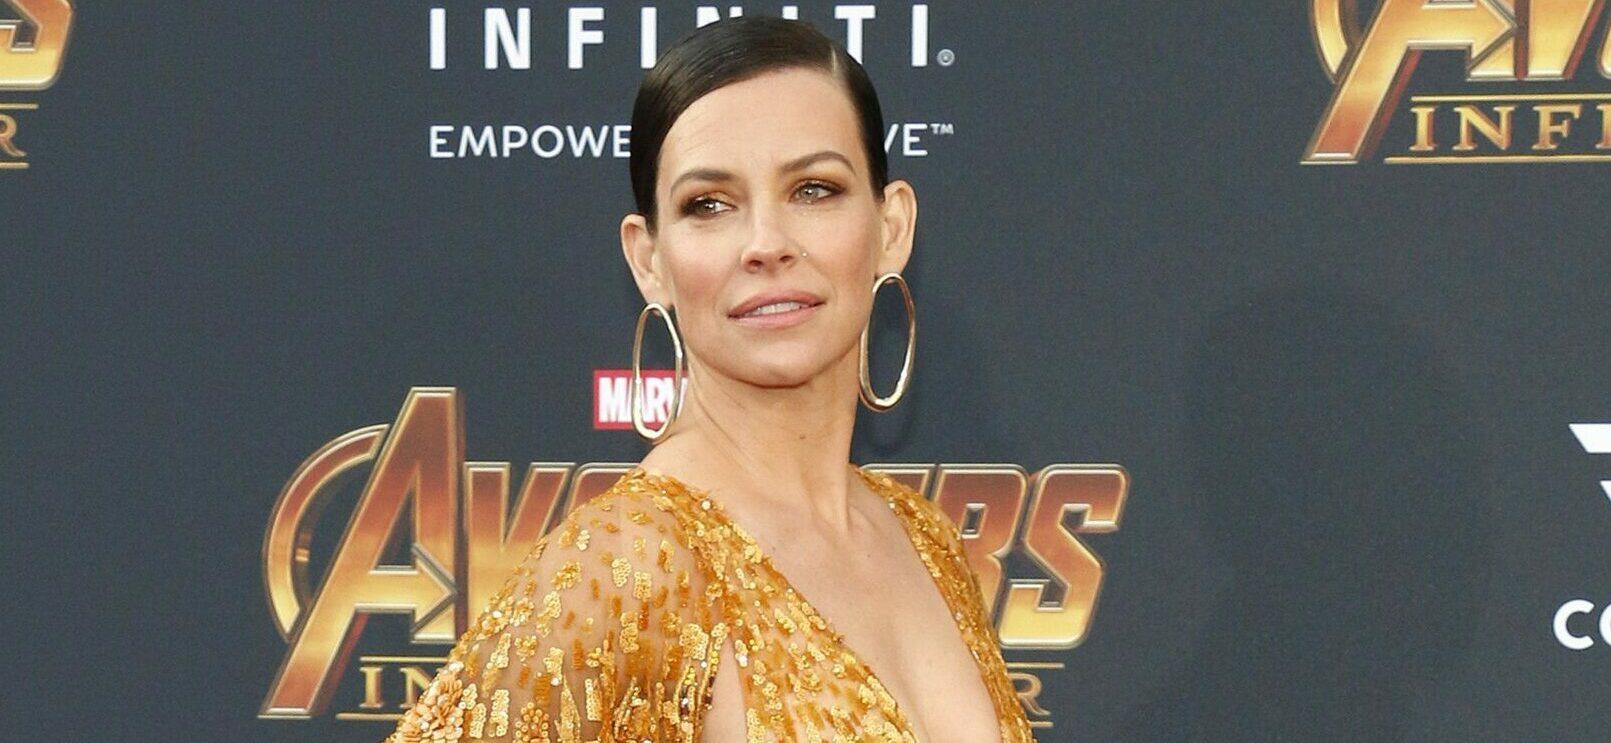 Los Angeles premiere of Disney and Marvel's 'Avengers: Infinity War' held at the El Capitan Theatre in Hollywood. 23 Apr 2018 Pictured: Evangeline Lilly.